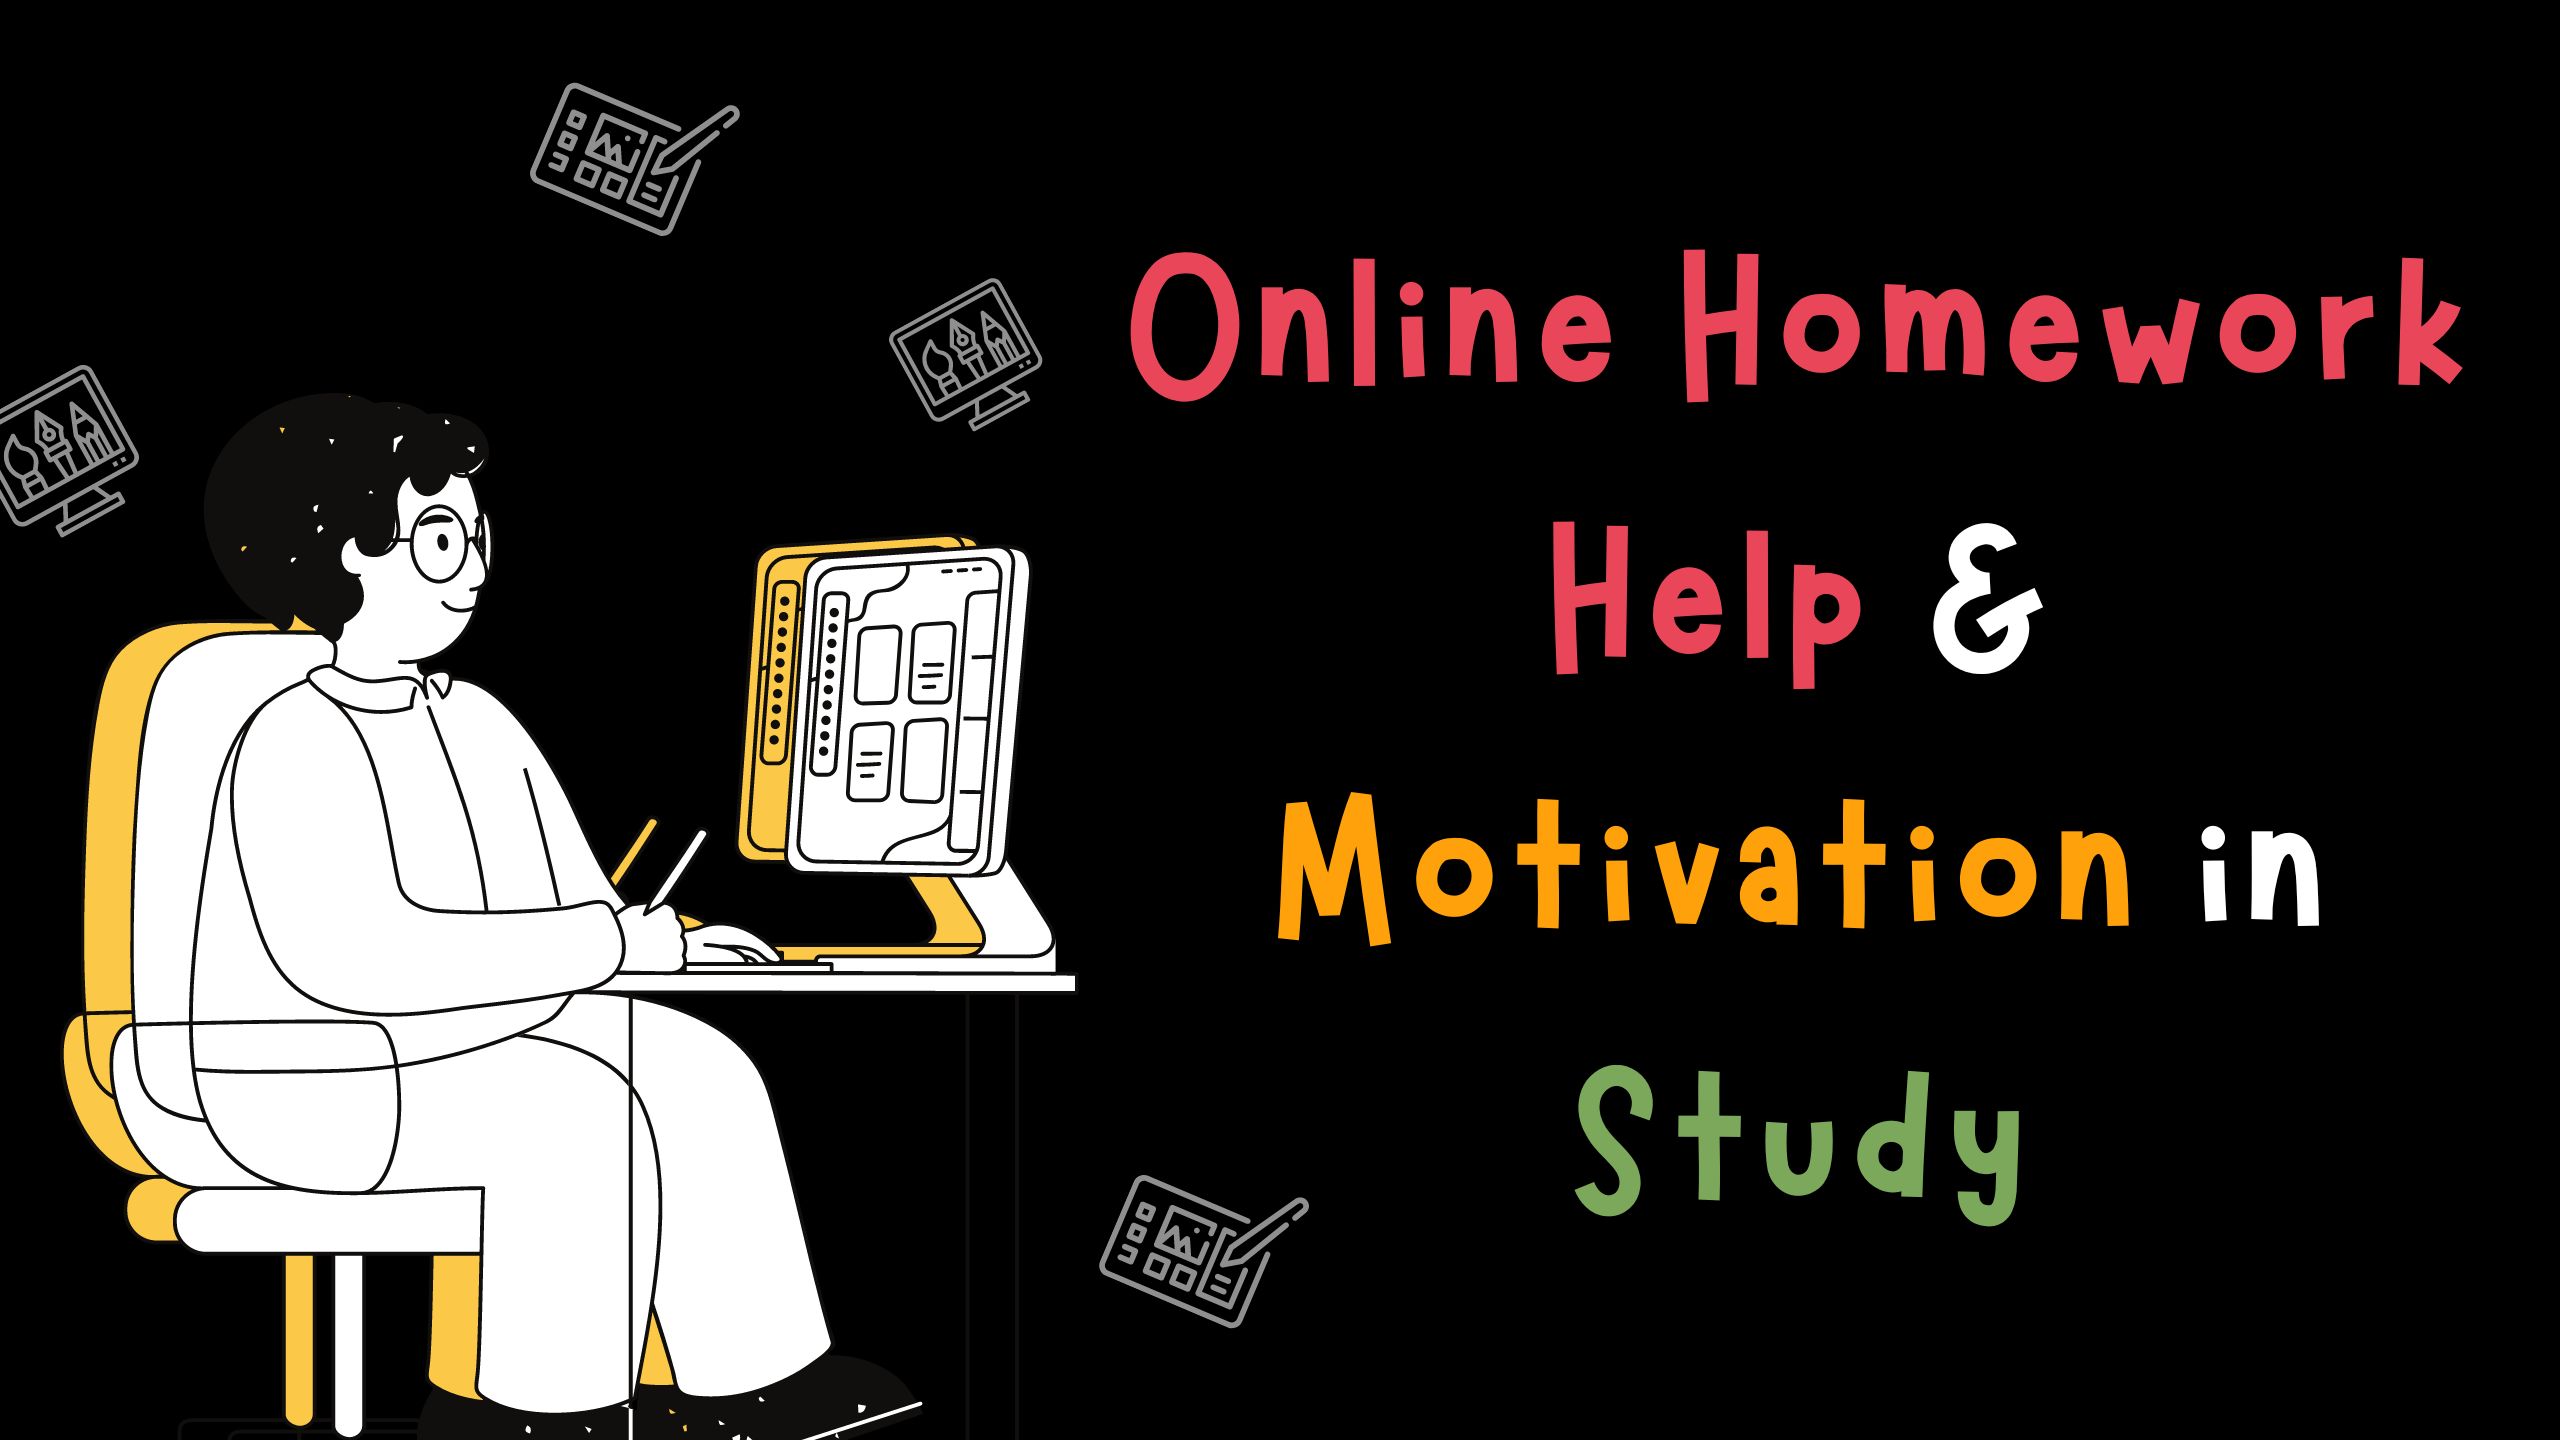 Online Homework Help and Motivation in Study